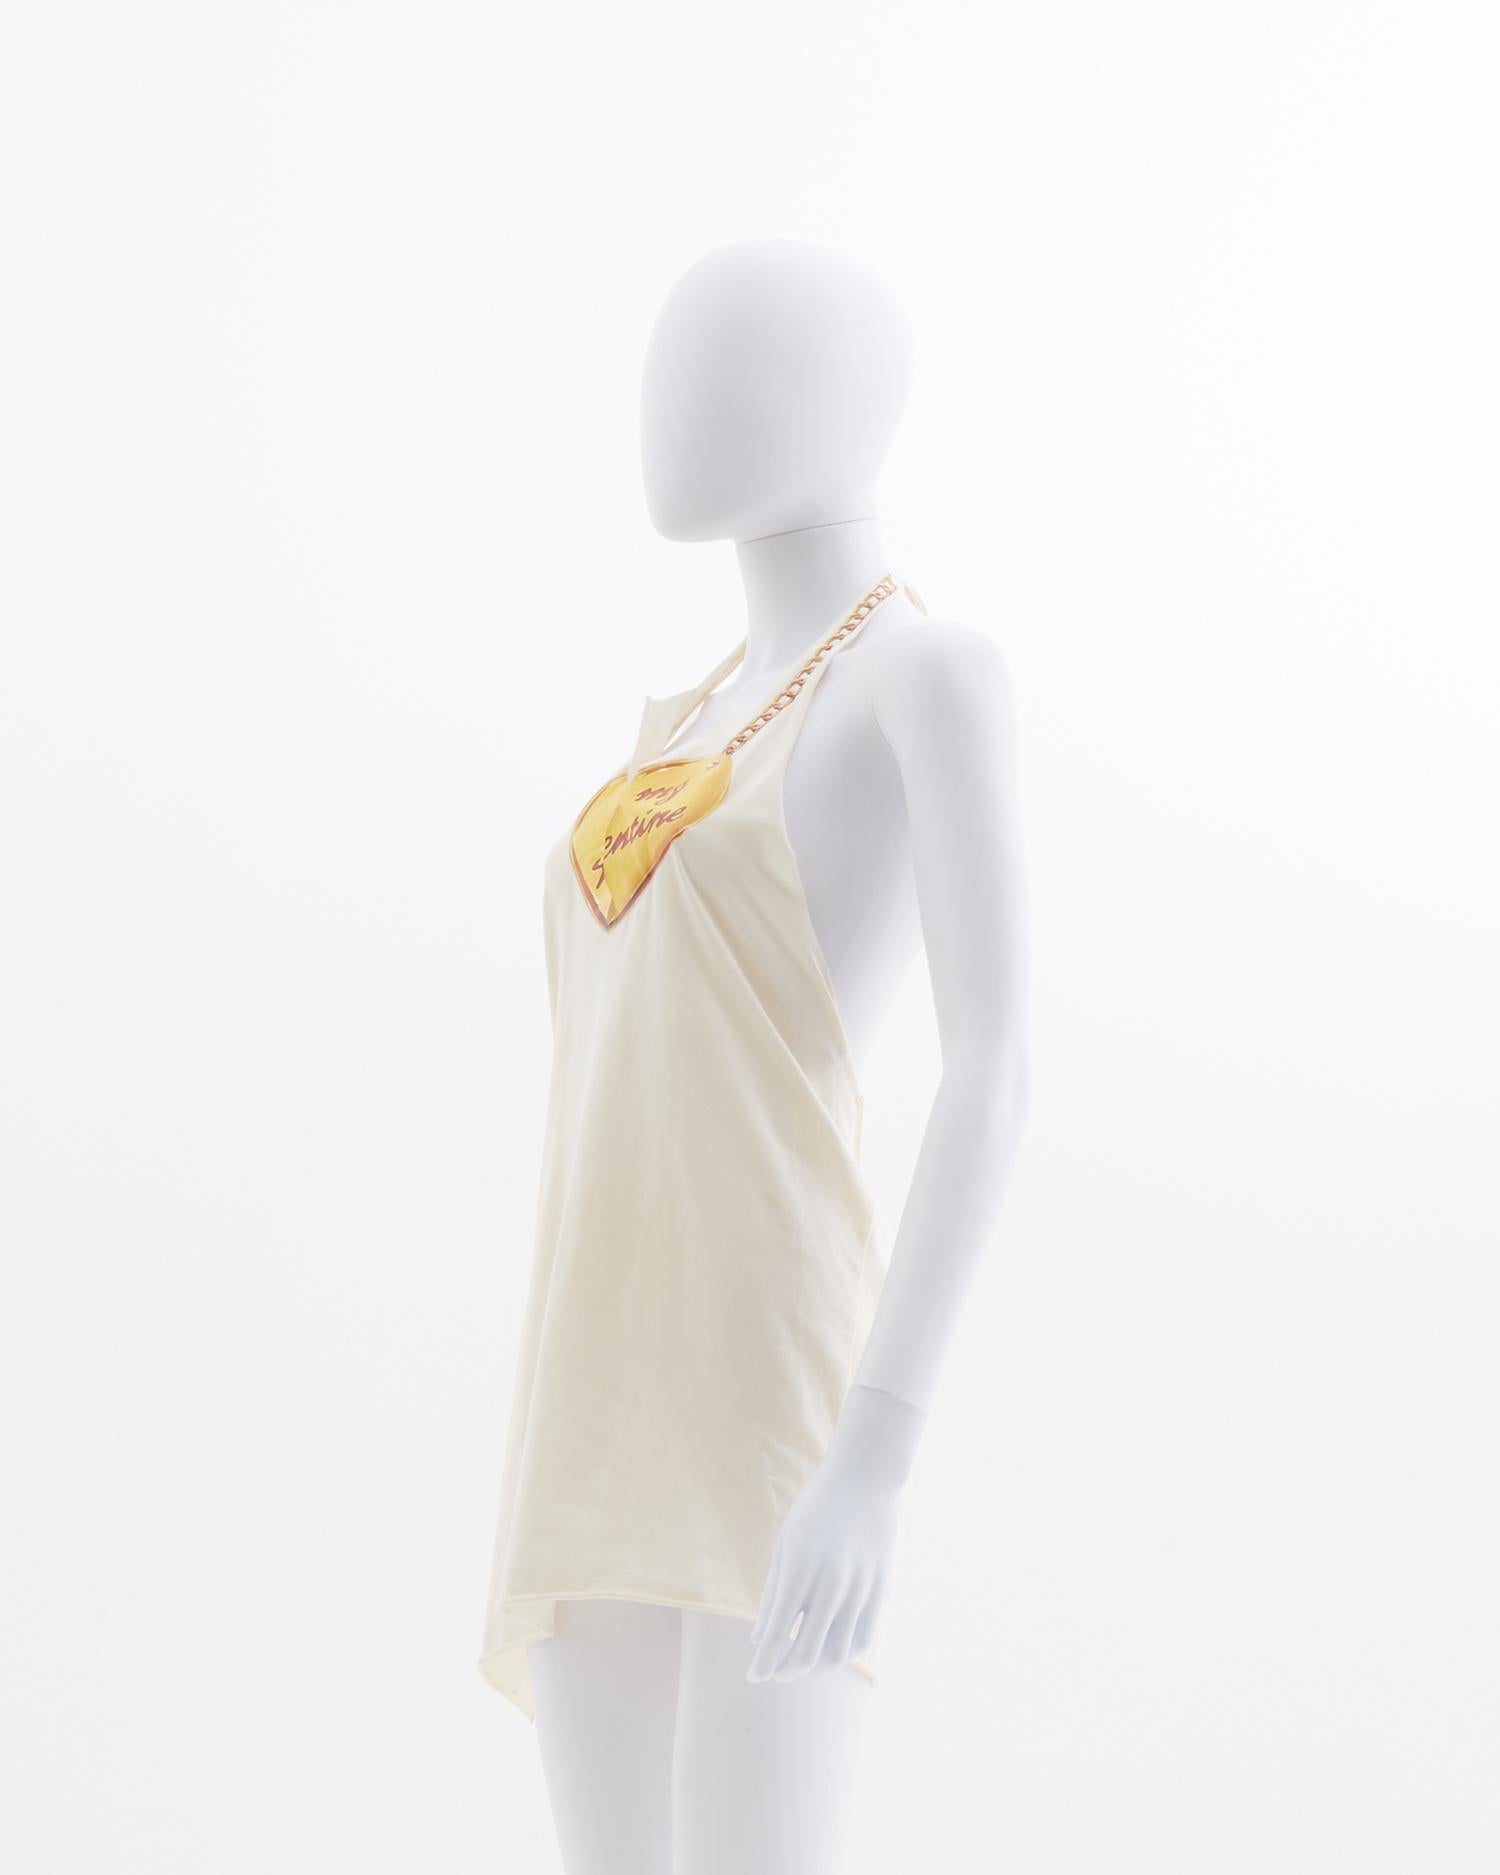 - Designed by Phoebe Philo 
- Sold by Skof.Archive 
- New with original tag
- V-neck cut row in the middle with a yellow printed heart 
- Open back 
- Adjustable American neckline 
- Spring Summer 2002

Size : 
FR 36 - IT 40 - UK 8 - US 4